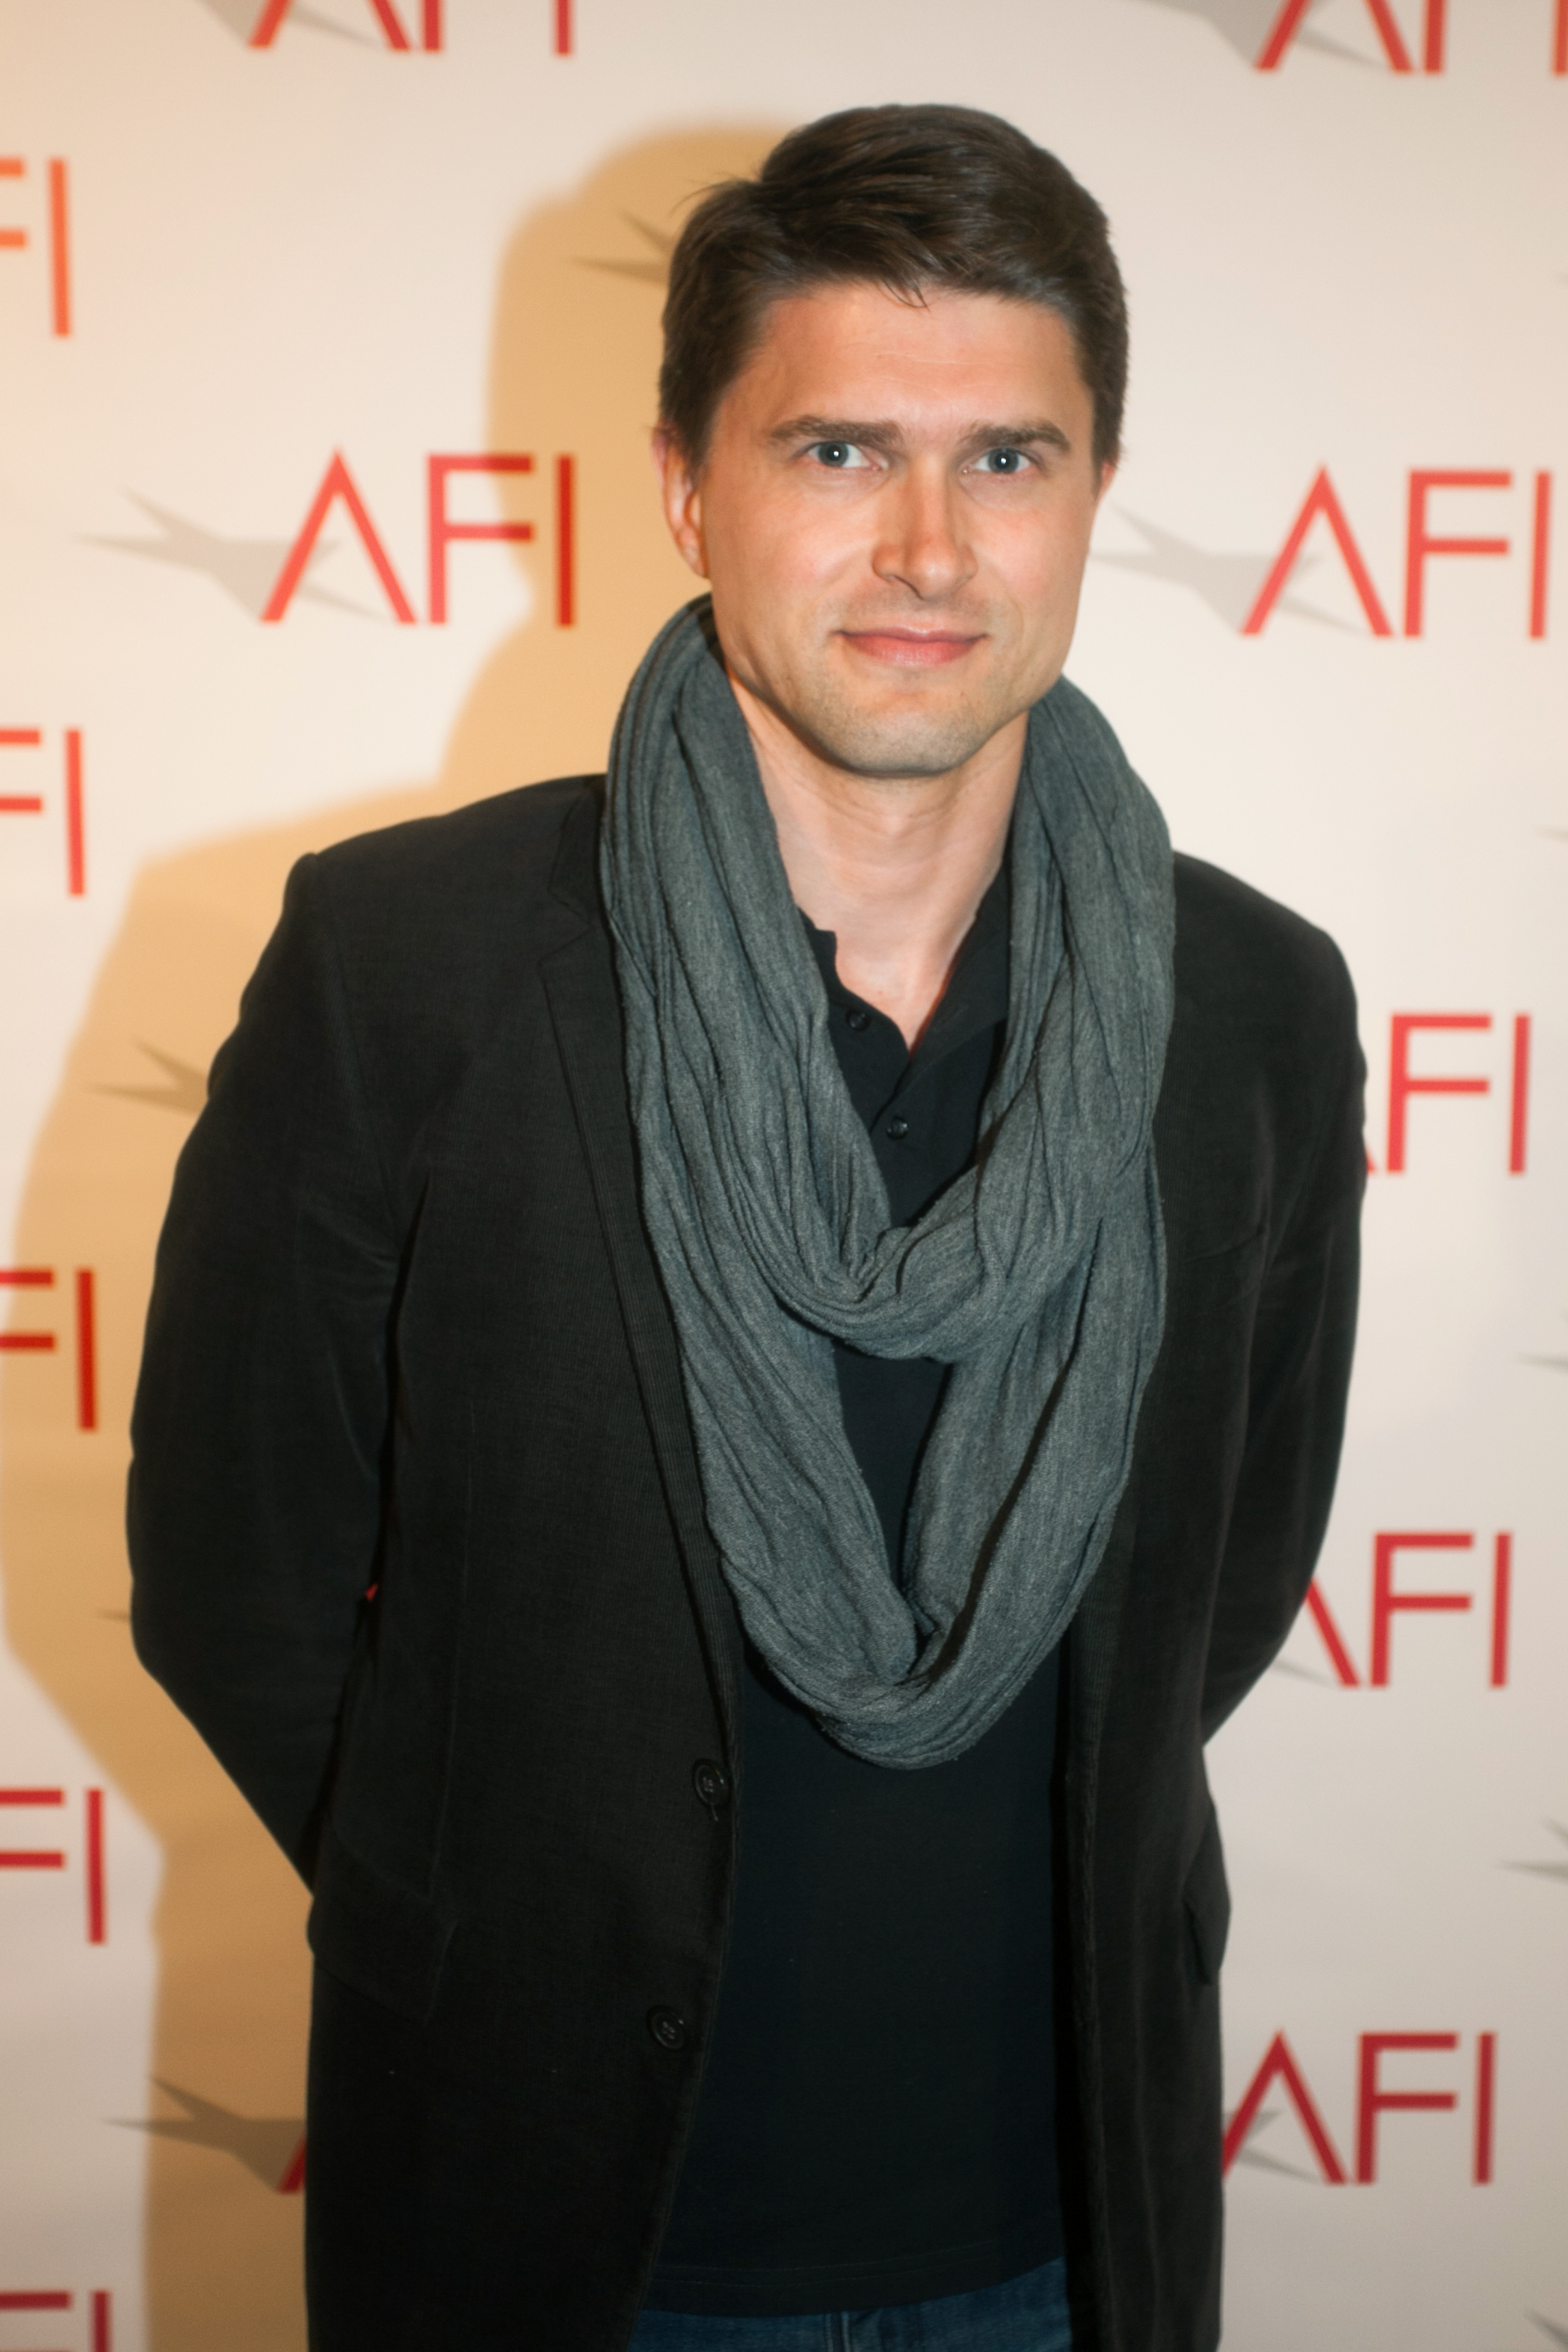 Paul Kowalski at an American Film Institute event at the Director's Guild of America in Los Angeles.